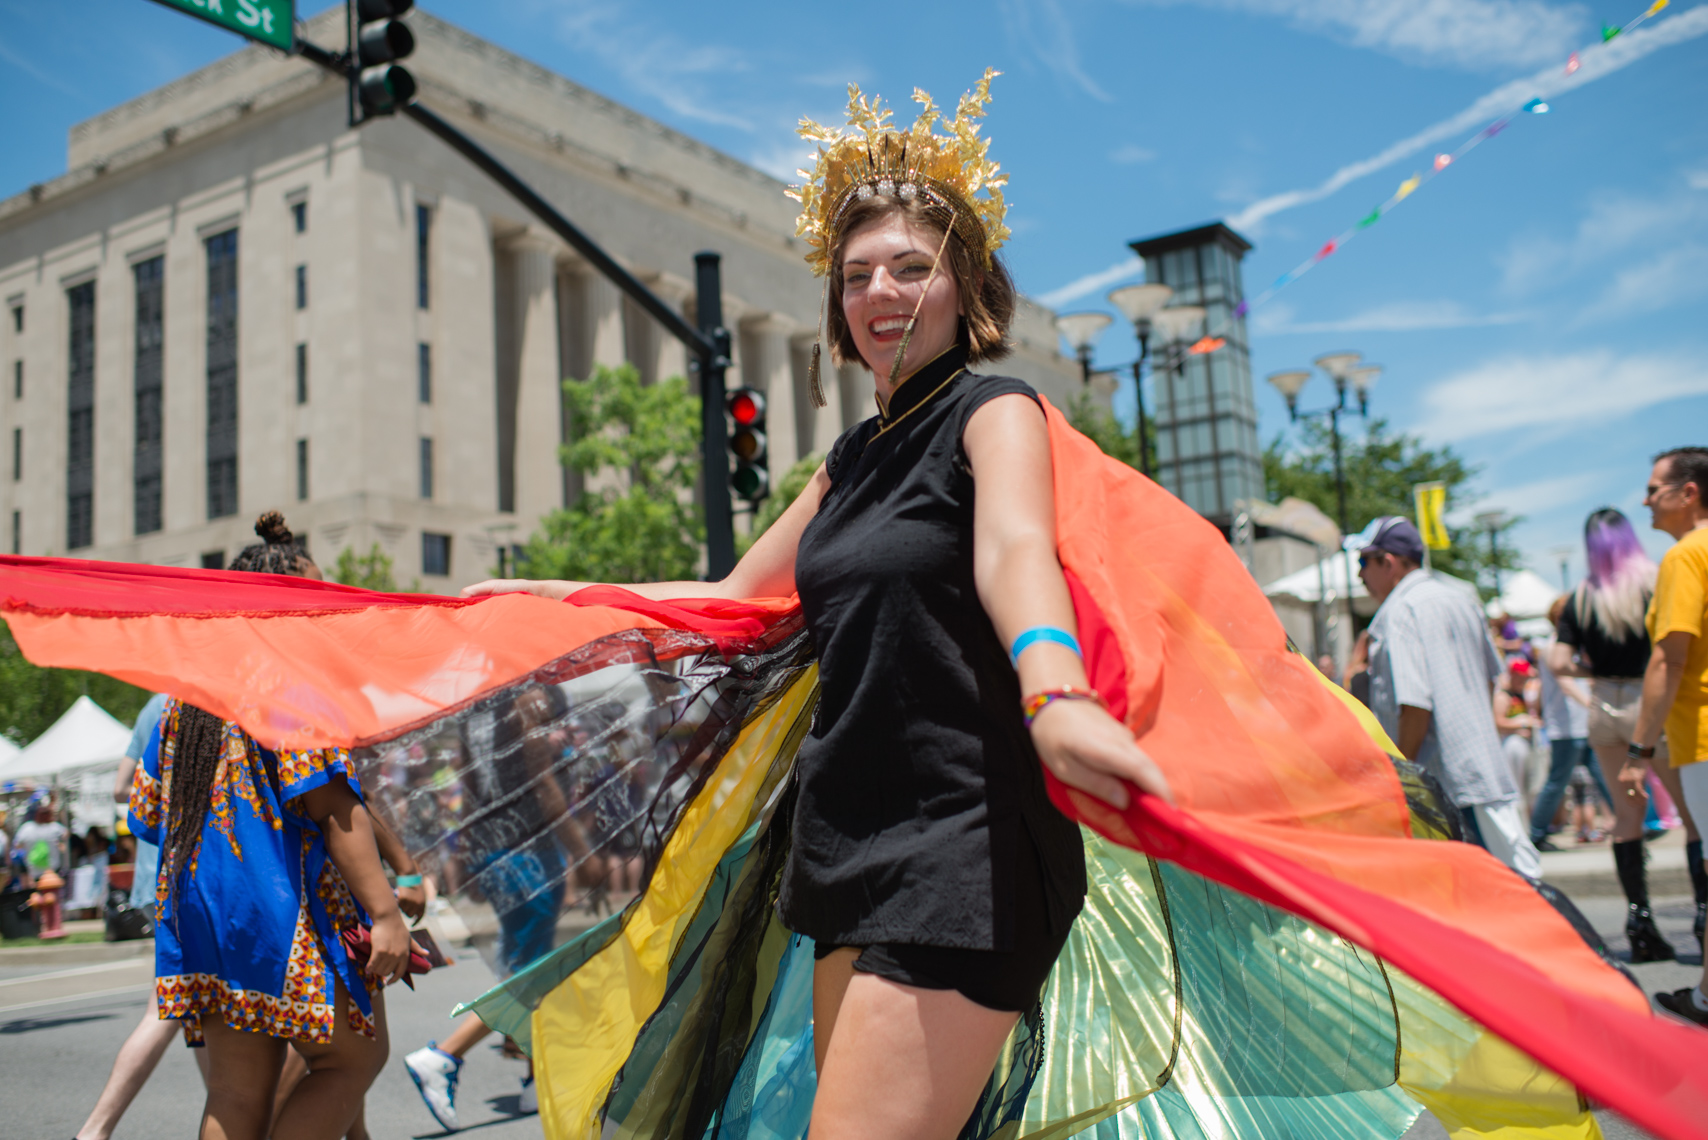 Nashville Pride Festival 2017 | Photographer + Director, Kristina Krug | authentic, authenticity, bisexual, celebrate, celebration, civil, civil liberties, courage, dancing, documentary, drag, emotions, equality, esteem, fearless, festival, festive, free, freedom, friends, fun, gay, happy, journalism, joy, joyful, Kristina Krug, krug photo, lesbian, LGBT, LGBTQ, liberty, love, love wins, loved, love is love, loveliness, lovers, love wins, men, National Pride Day, parade, people, photographer, photojournalism, photojournalist, Portrait, Predators, pride, Pride Parade, proud, queen, queer, relationship, reportage, respect, rights, safety, self, sexuality, summer, sun, sunny, Transgender, street performer with wings and tiara dancing queen crown, happy and fun on a bright beautiful sunny day